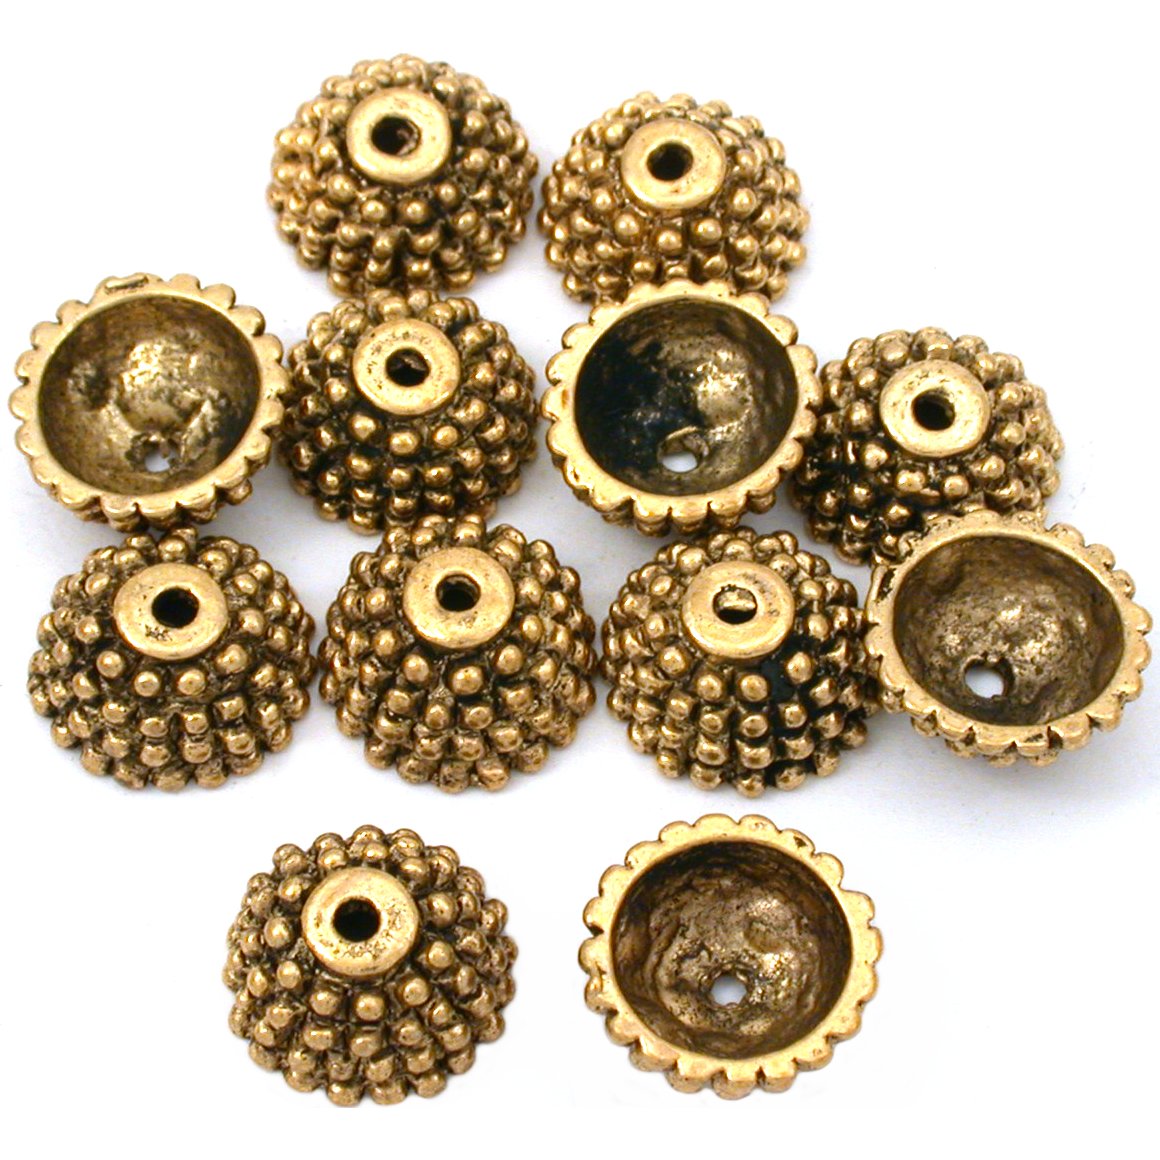 Bali Dot Beads Caps Antique Gold Plated 12.5mm 16 Grams 10Pcs Approx.